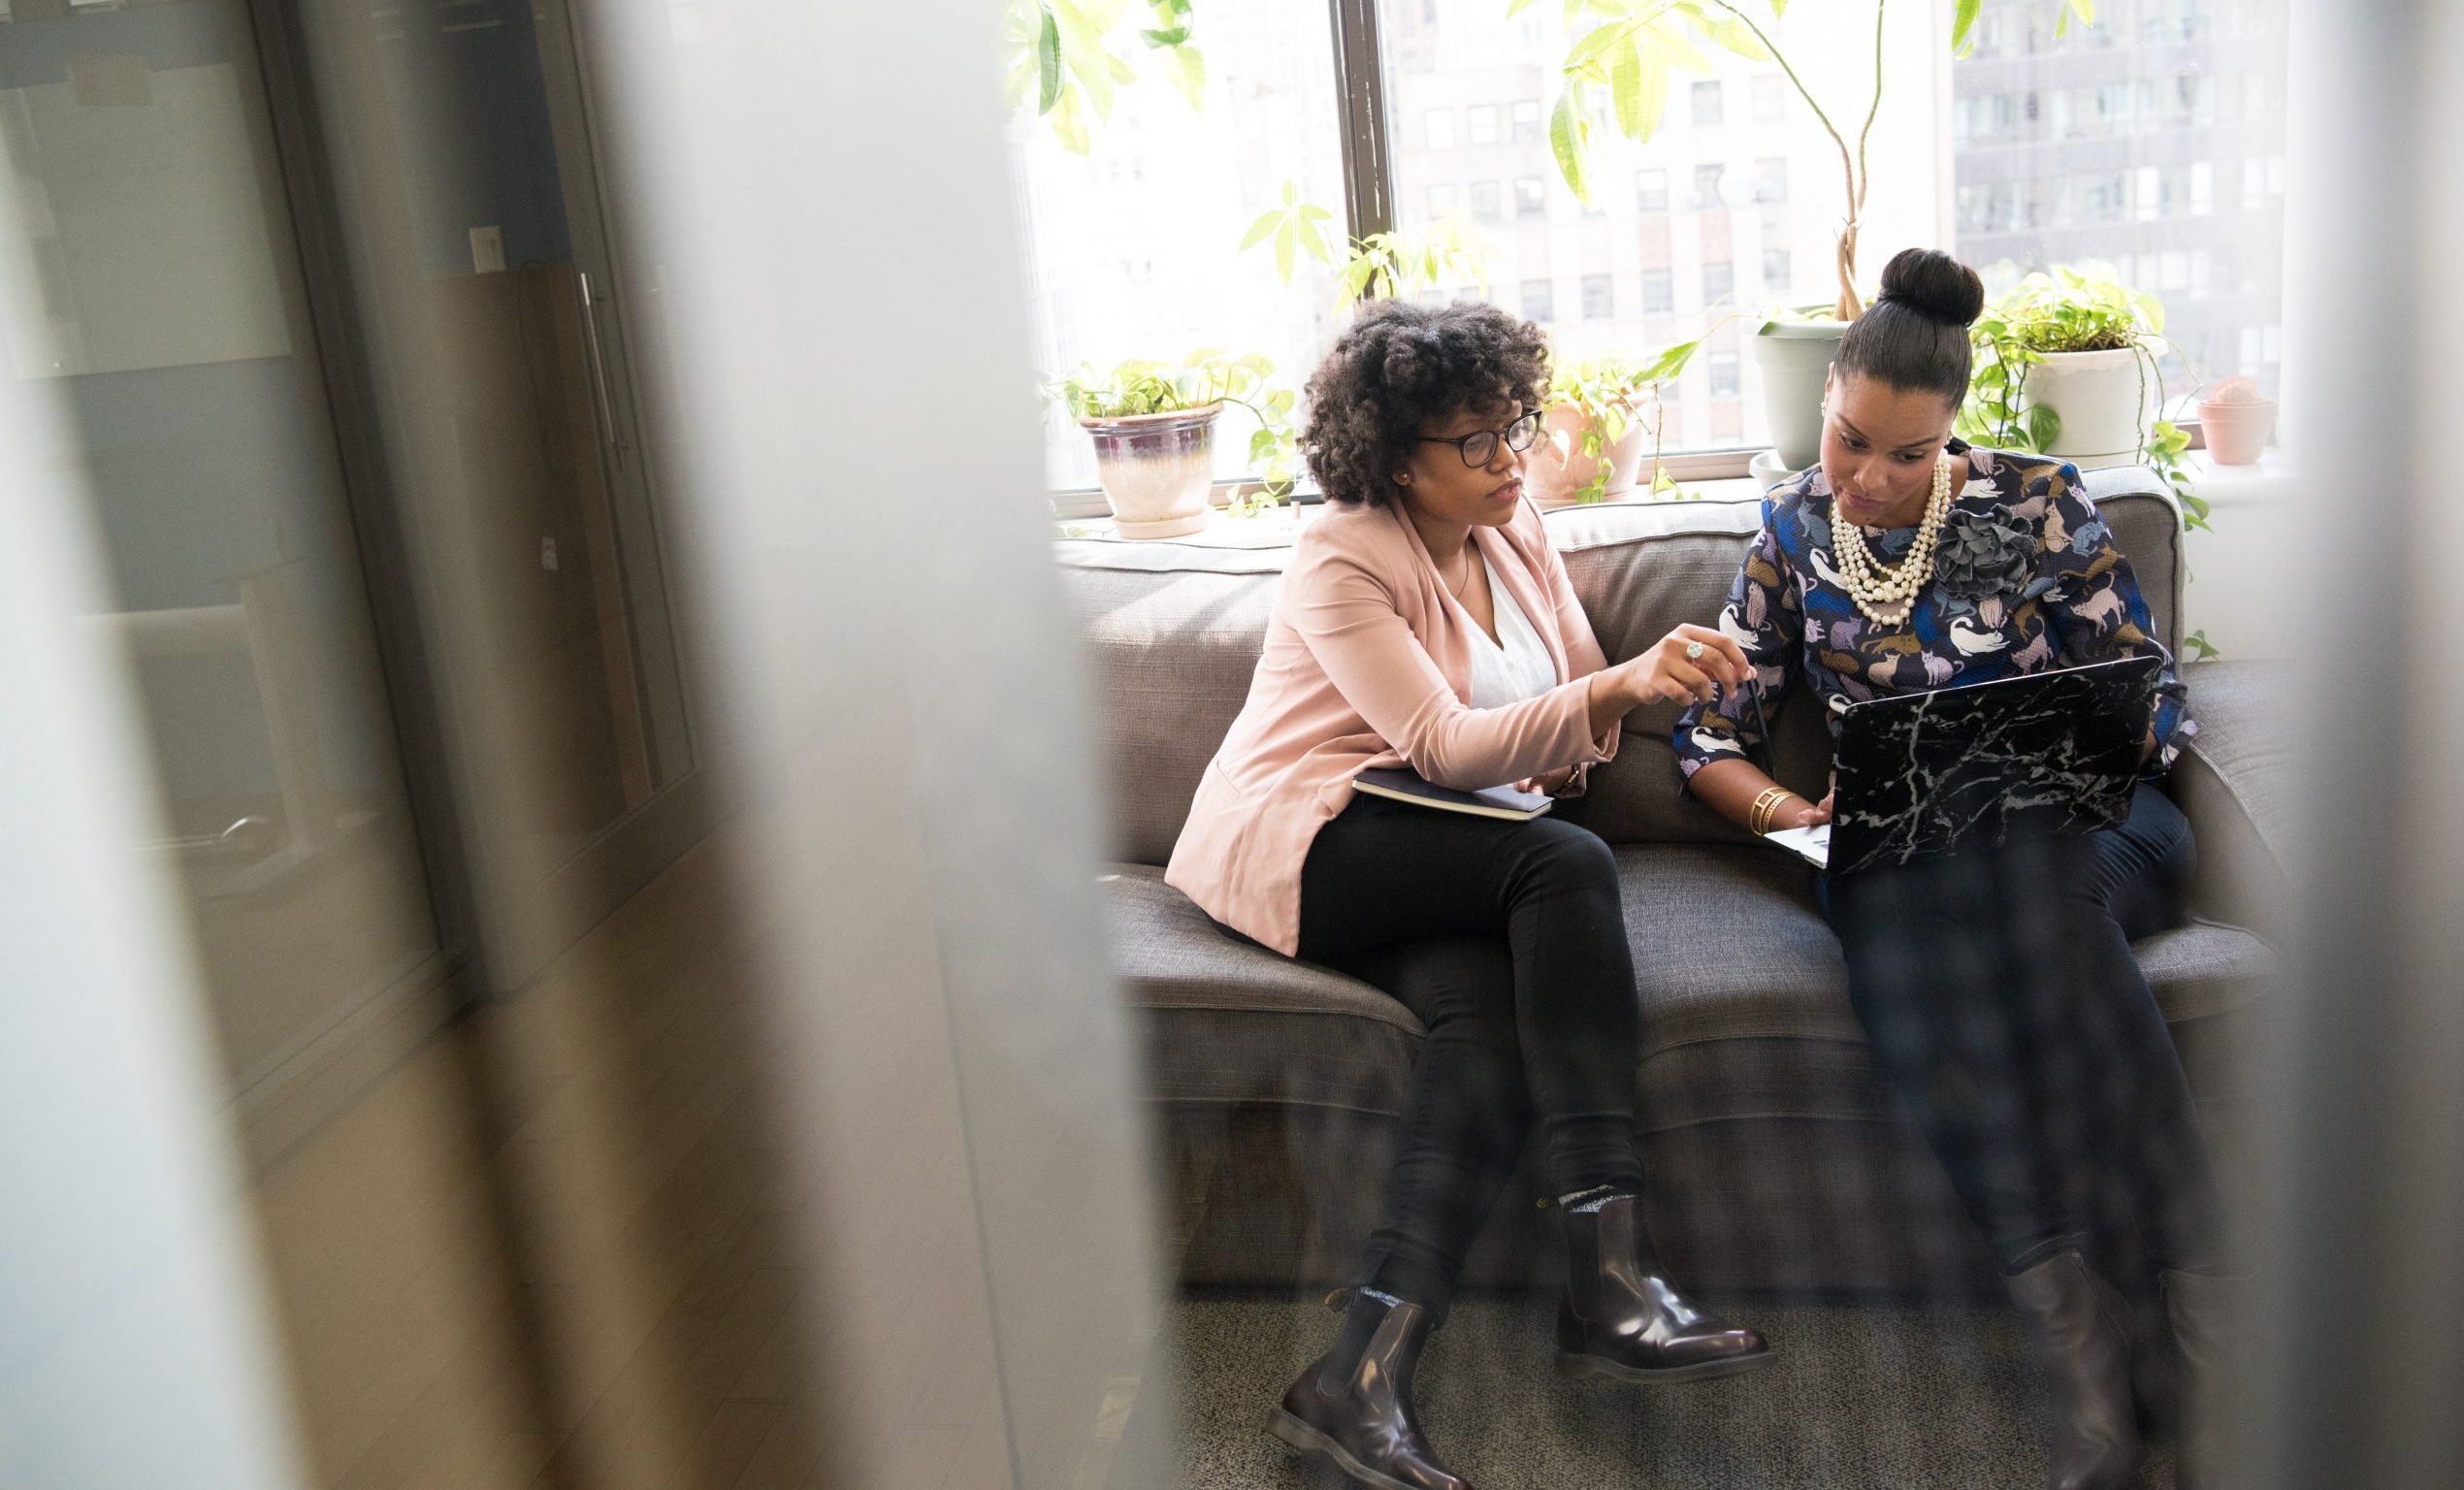 Two black women in business casual clothing sit on a sofa in an office setting. They are looking at a laptop together.